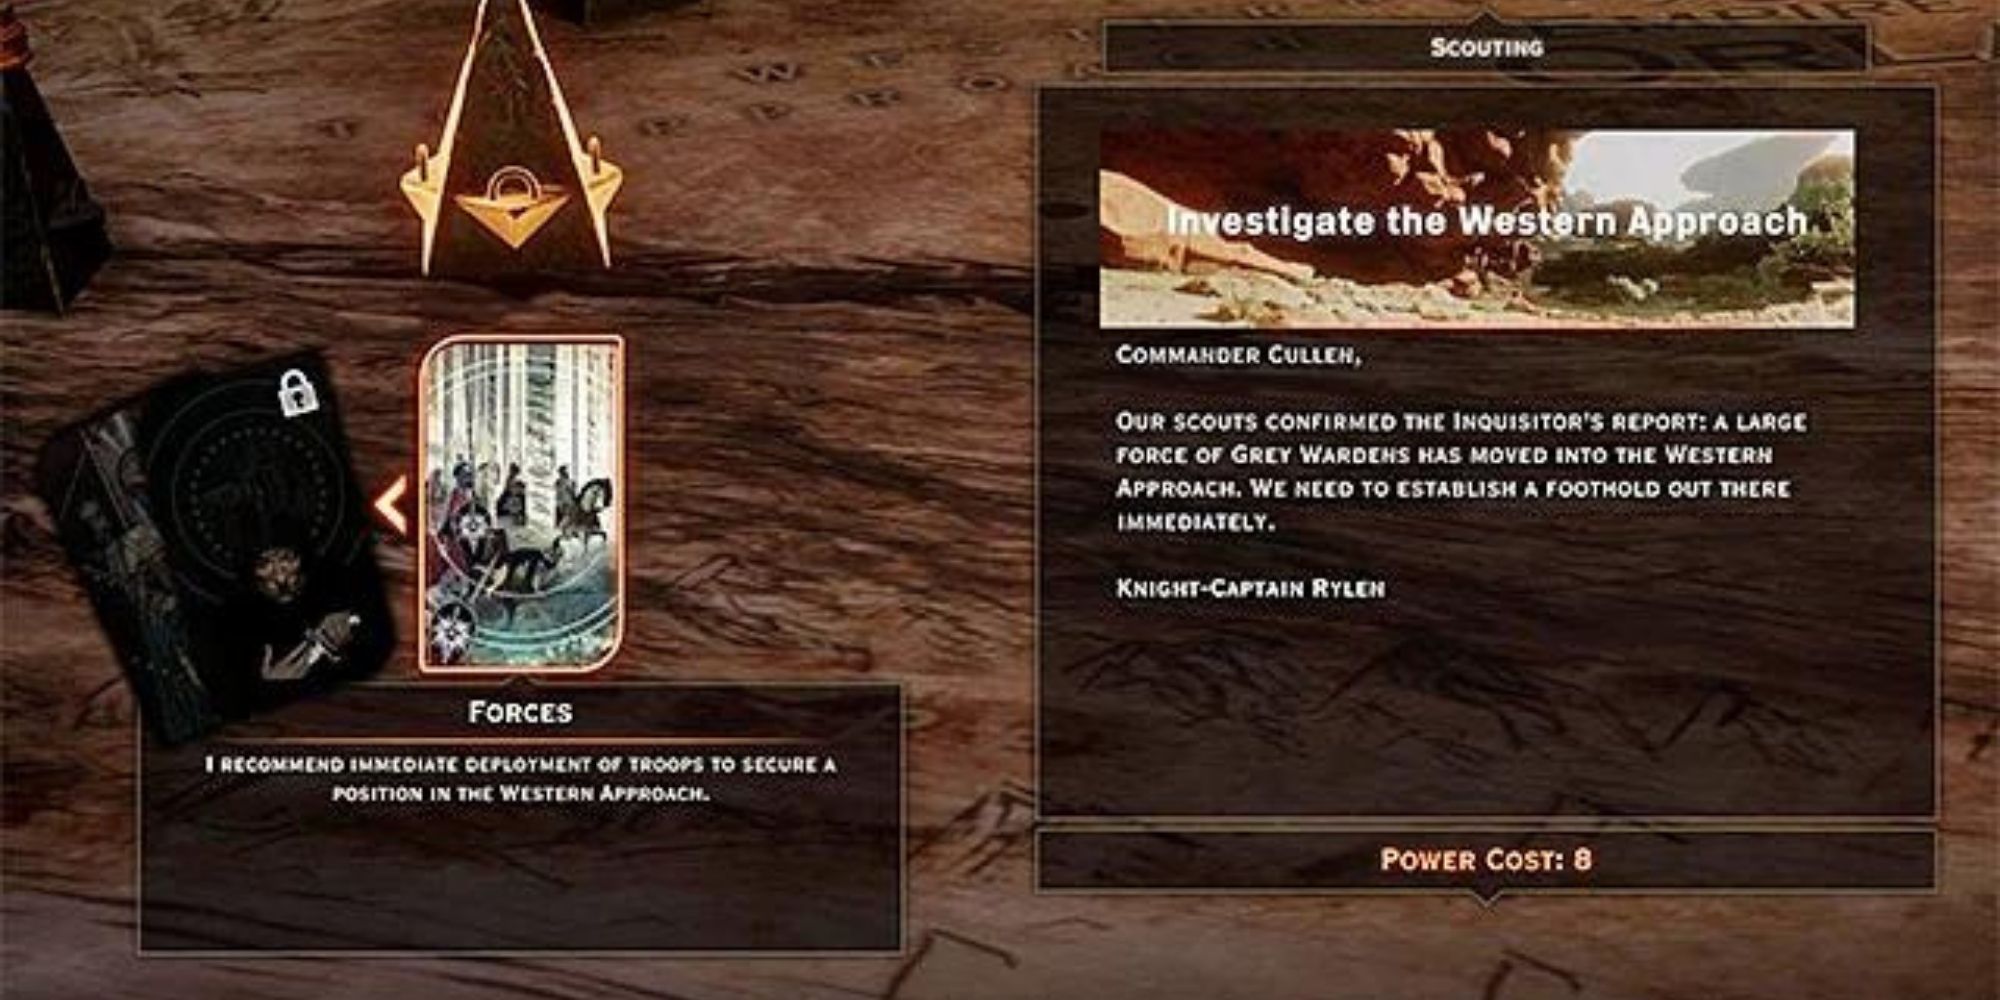 Dragon Age Inquisition - Investigate the Western Approach War Table Operation